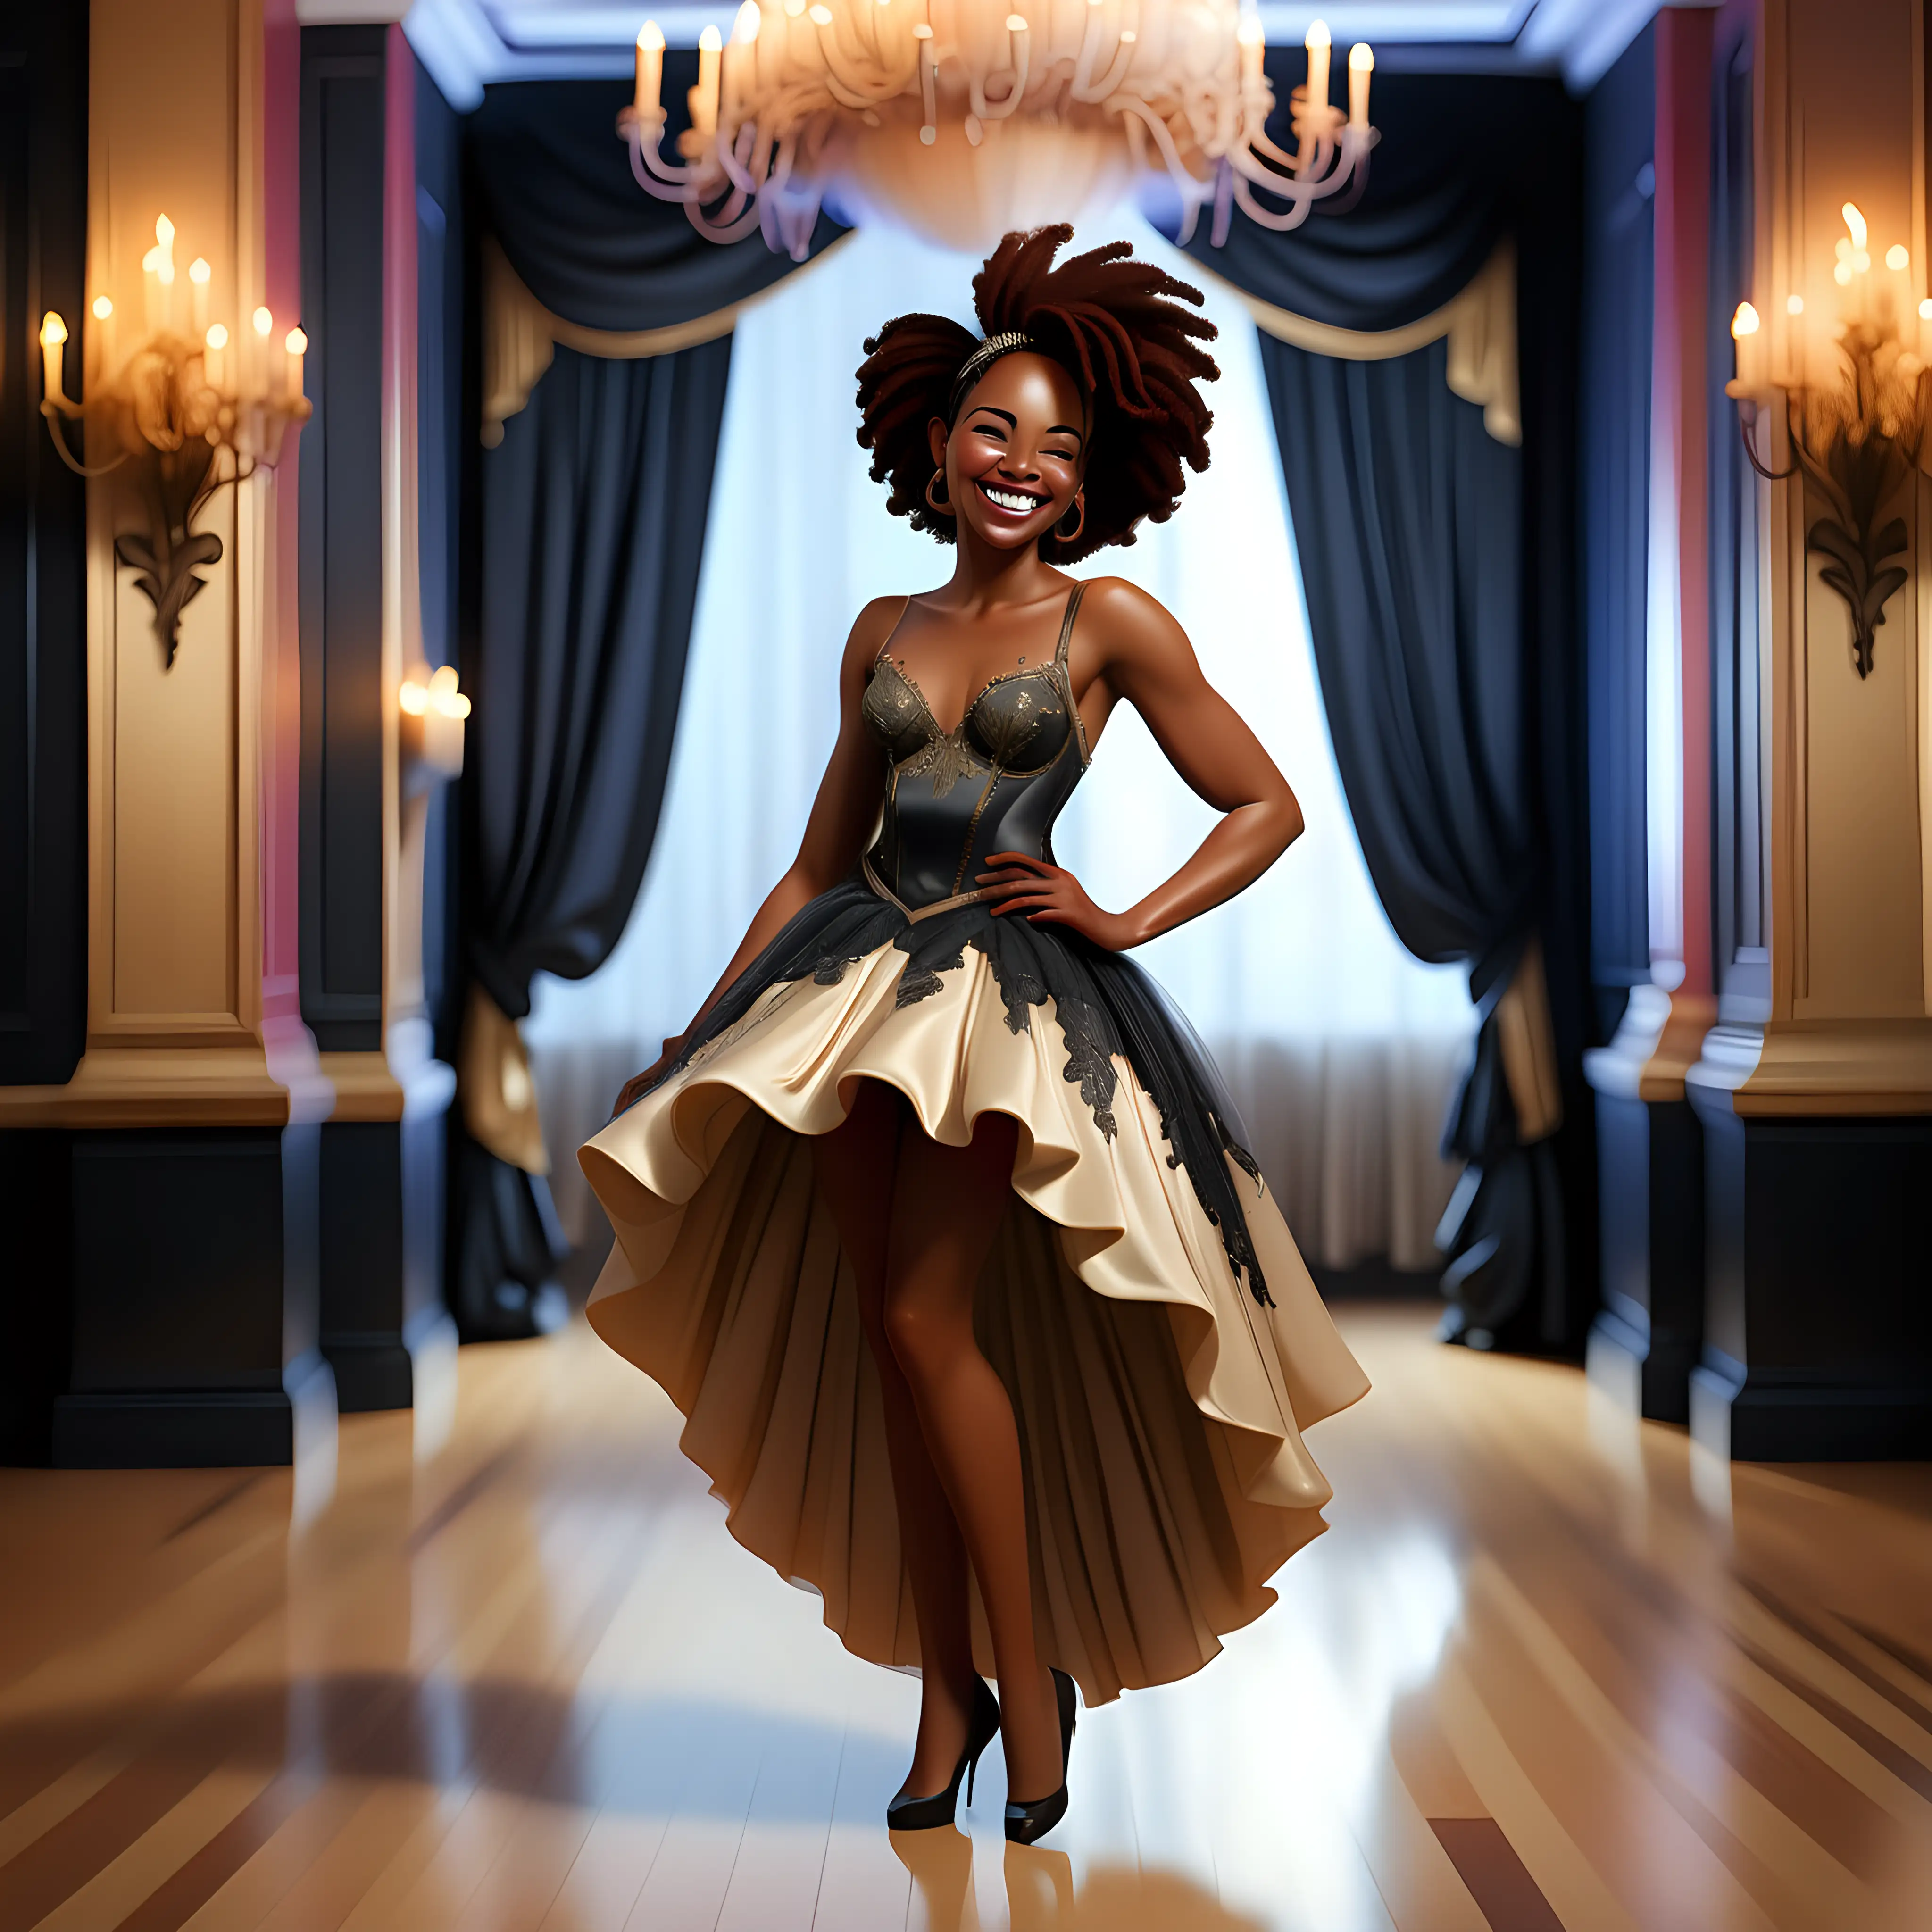 Black woman in a fancy dress at a ballroom smiling full body